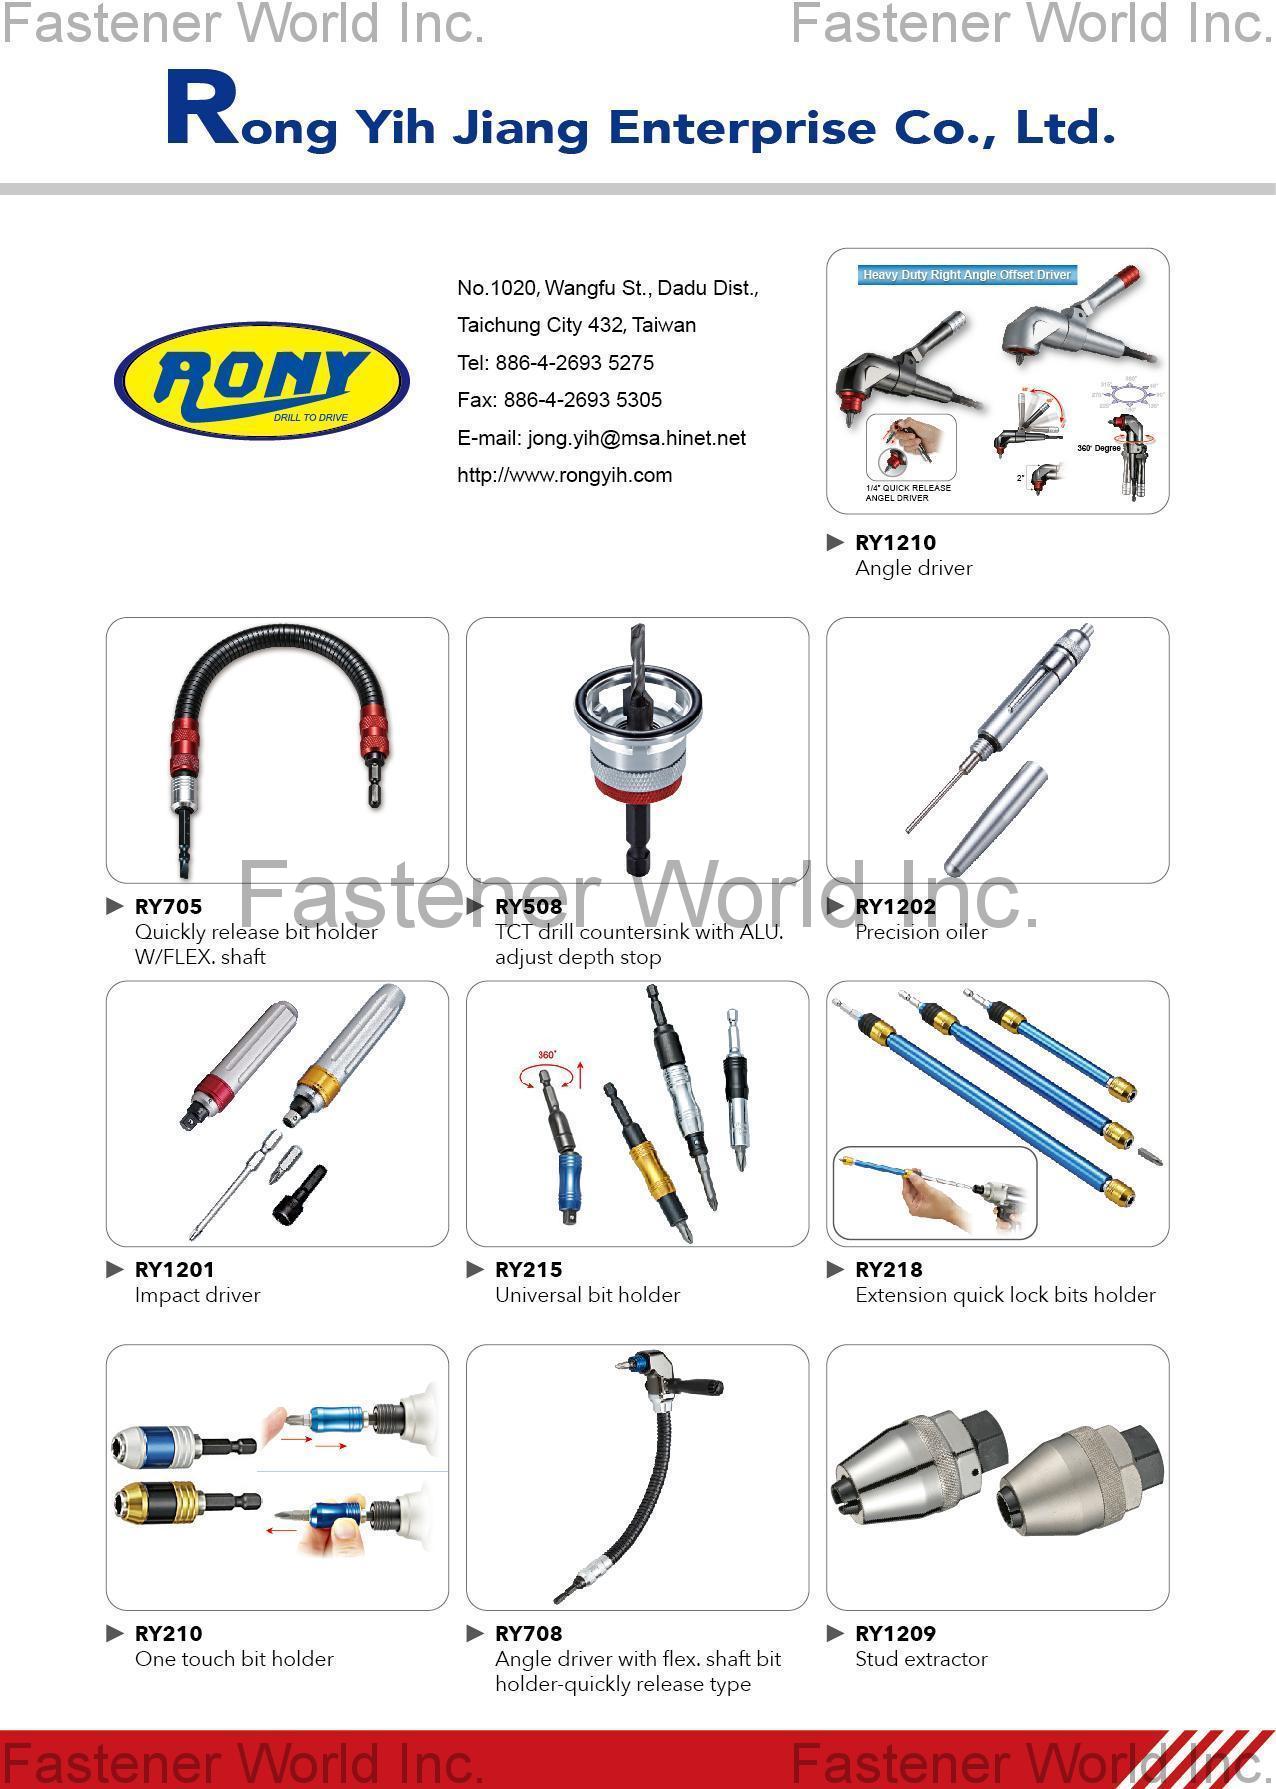 RONG YIH JIANG ENTERPRISE CO., LTD. , Angle Drive, Shaft, Precision Oiler, Impact Drive, Universal bit holder, Extension Quick Lock Bits Holder, One Touch Bit Holder, Stud Extractor